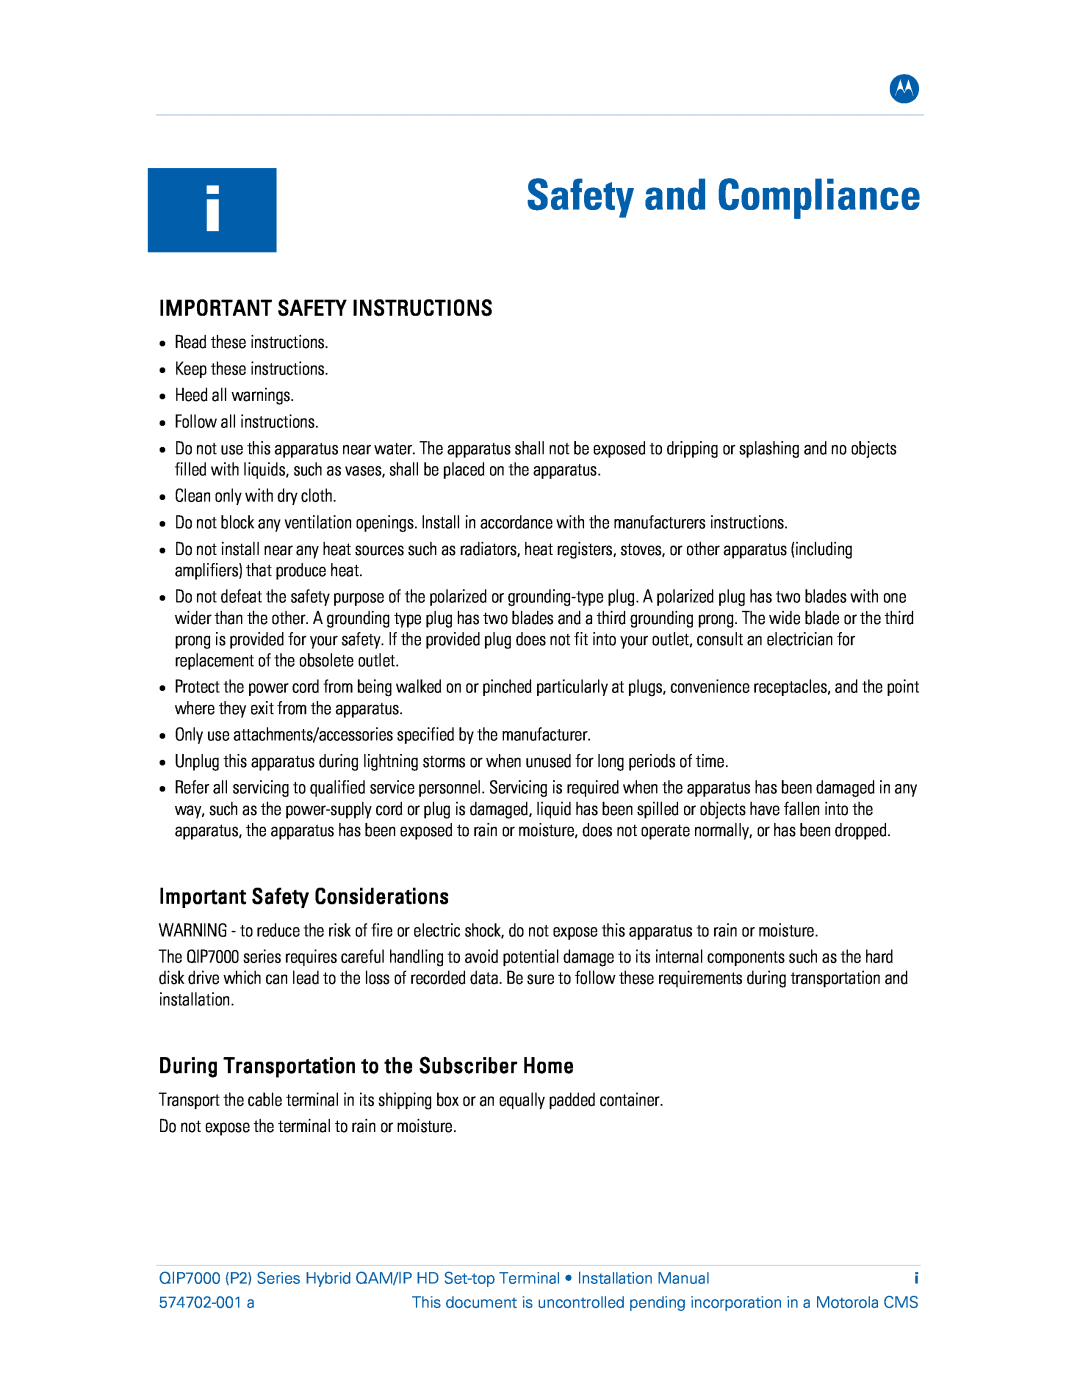 Motorola QIP7000 installation manual Safety and Compliance, Important Safety Instructions, Important Safety Considerations 